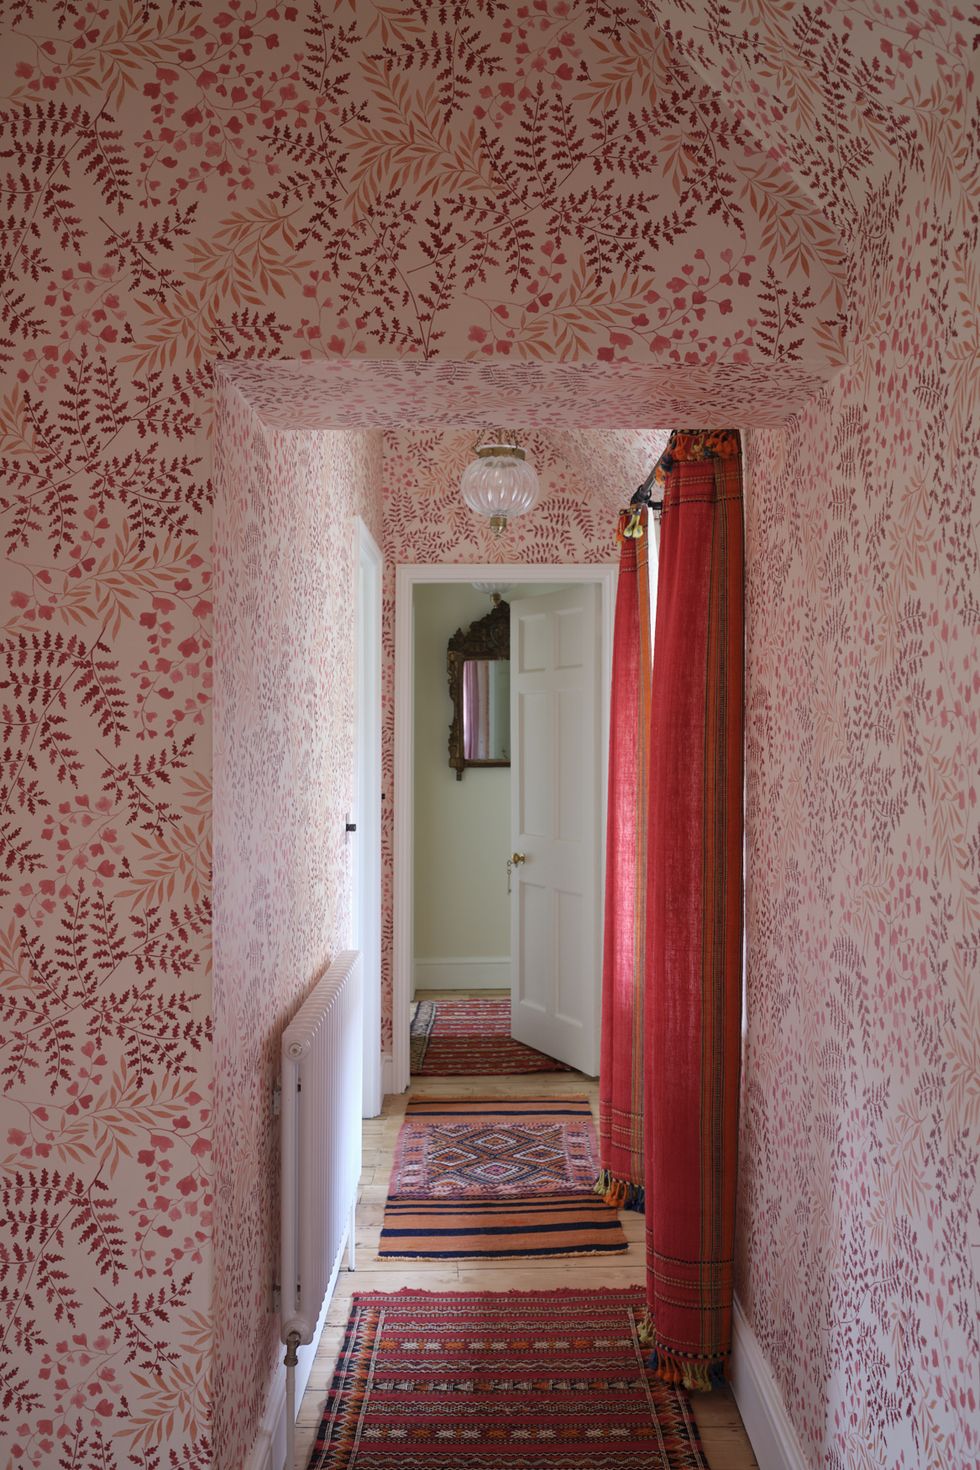 Corridor with red plant wallpaper and red curtains